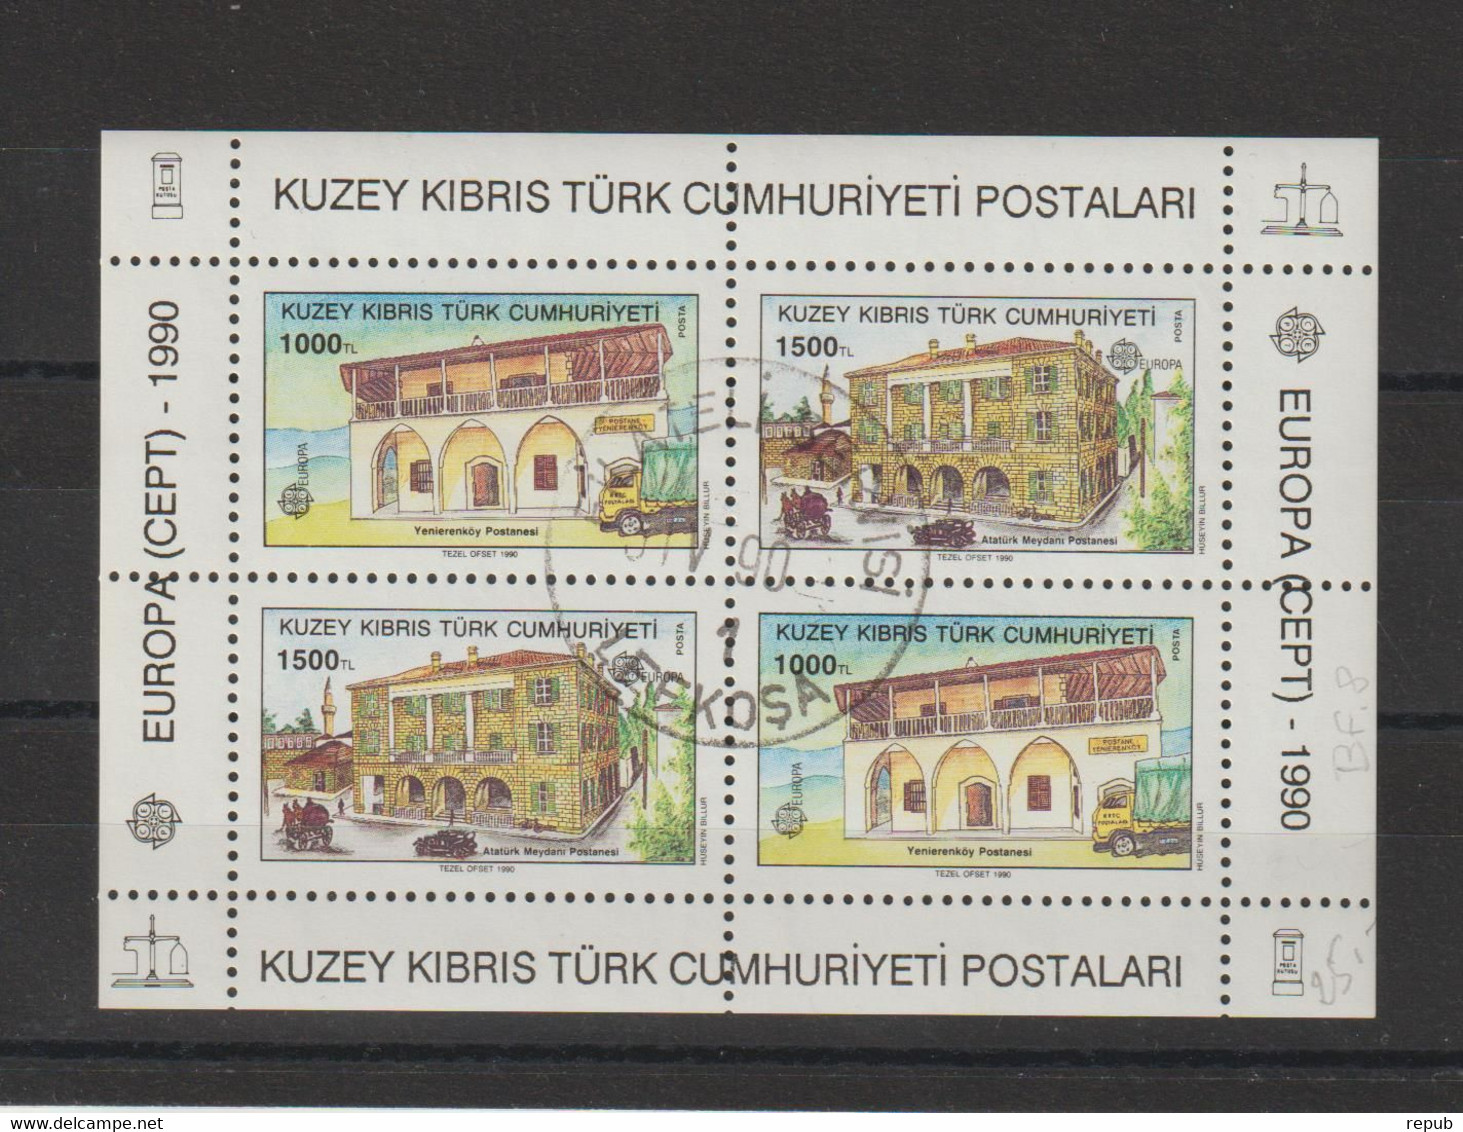 Europa 1990 Turquie Chypre BF 8 Oblit. Used - 1990